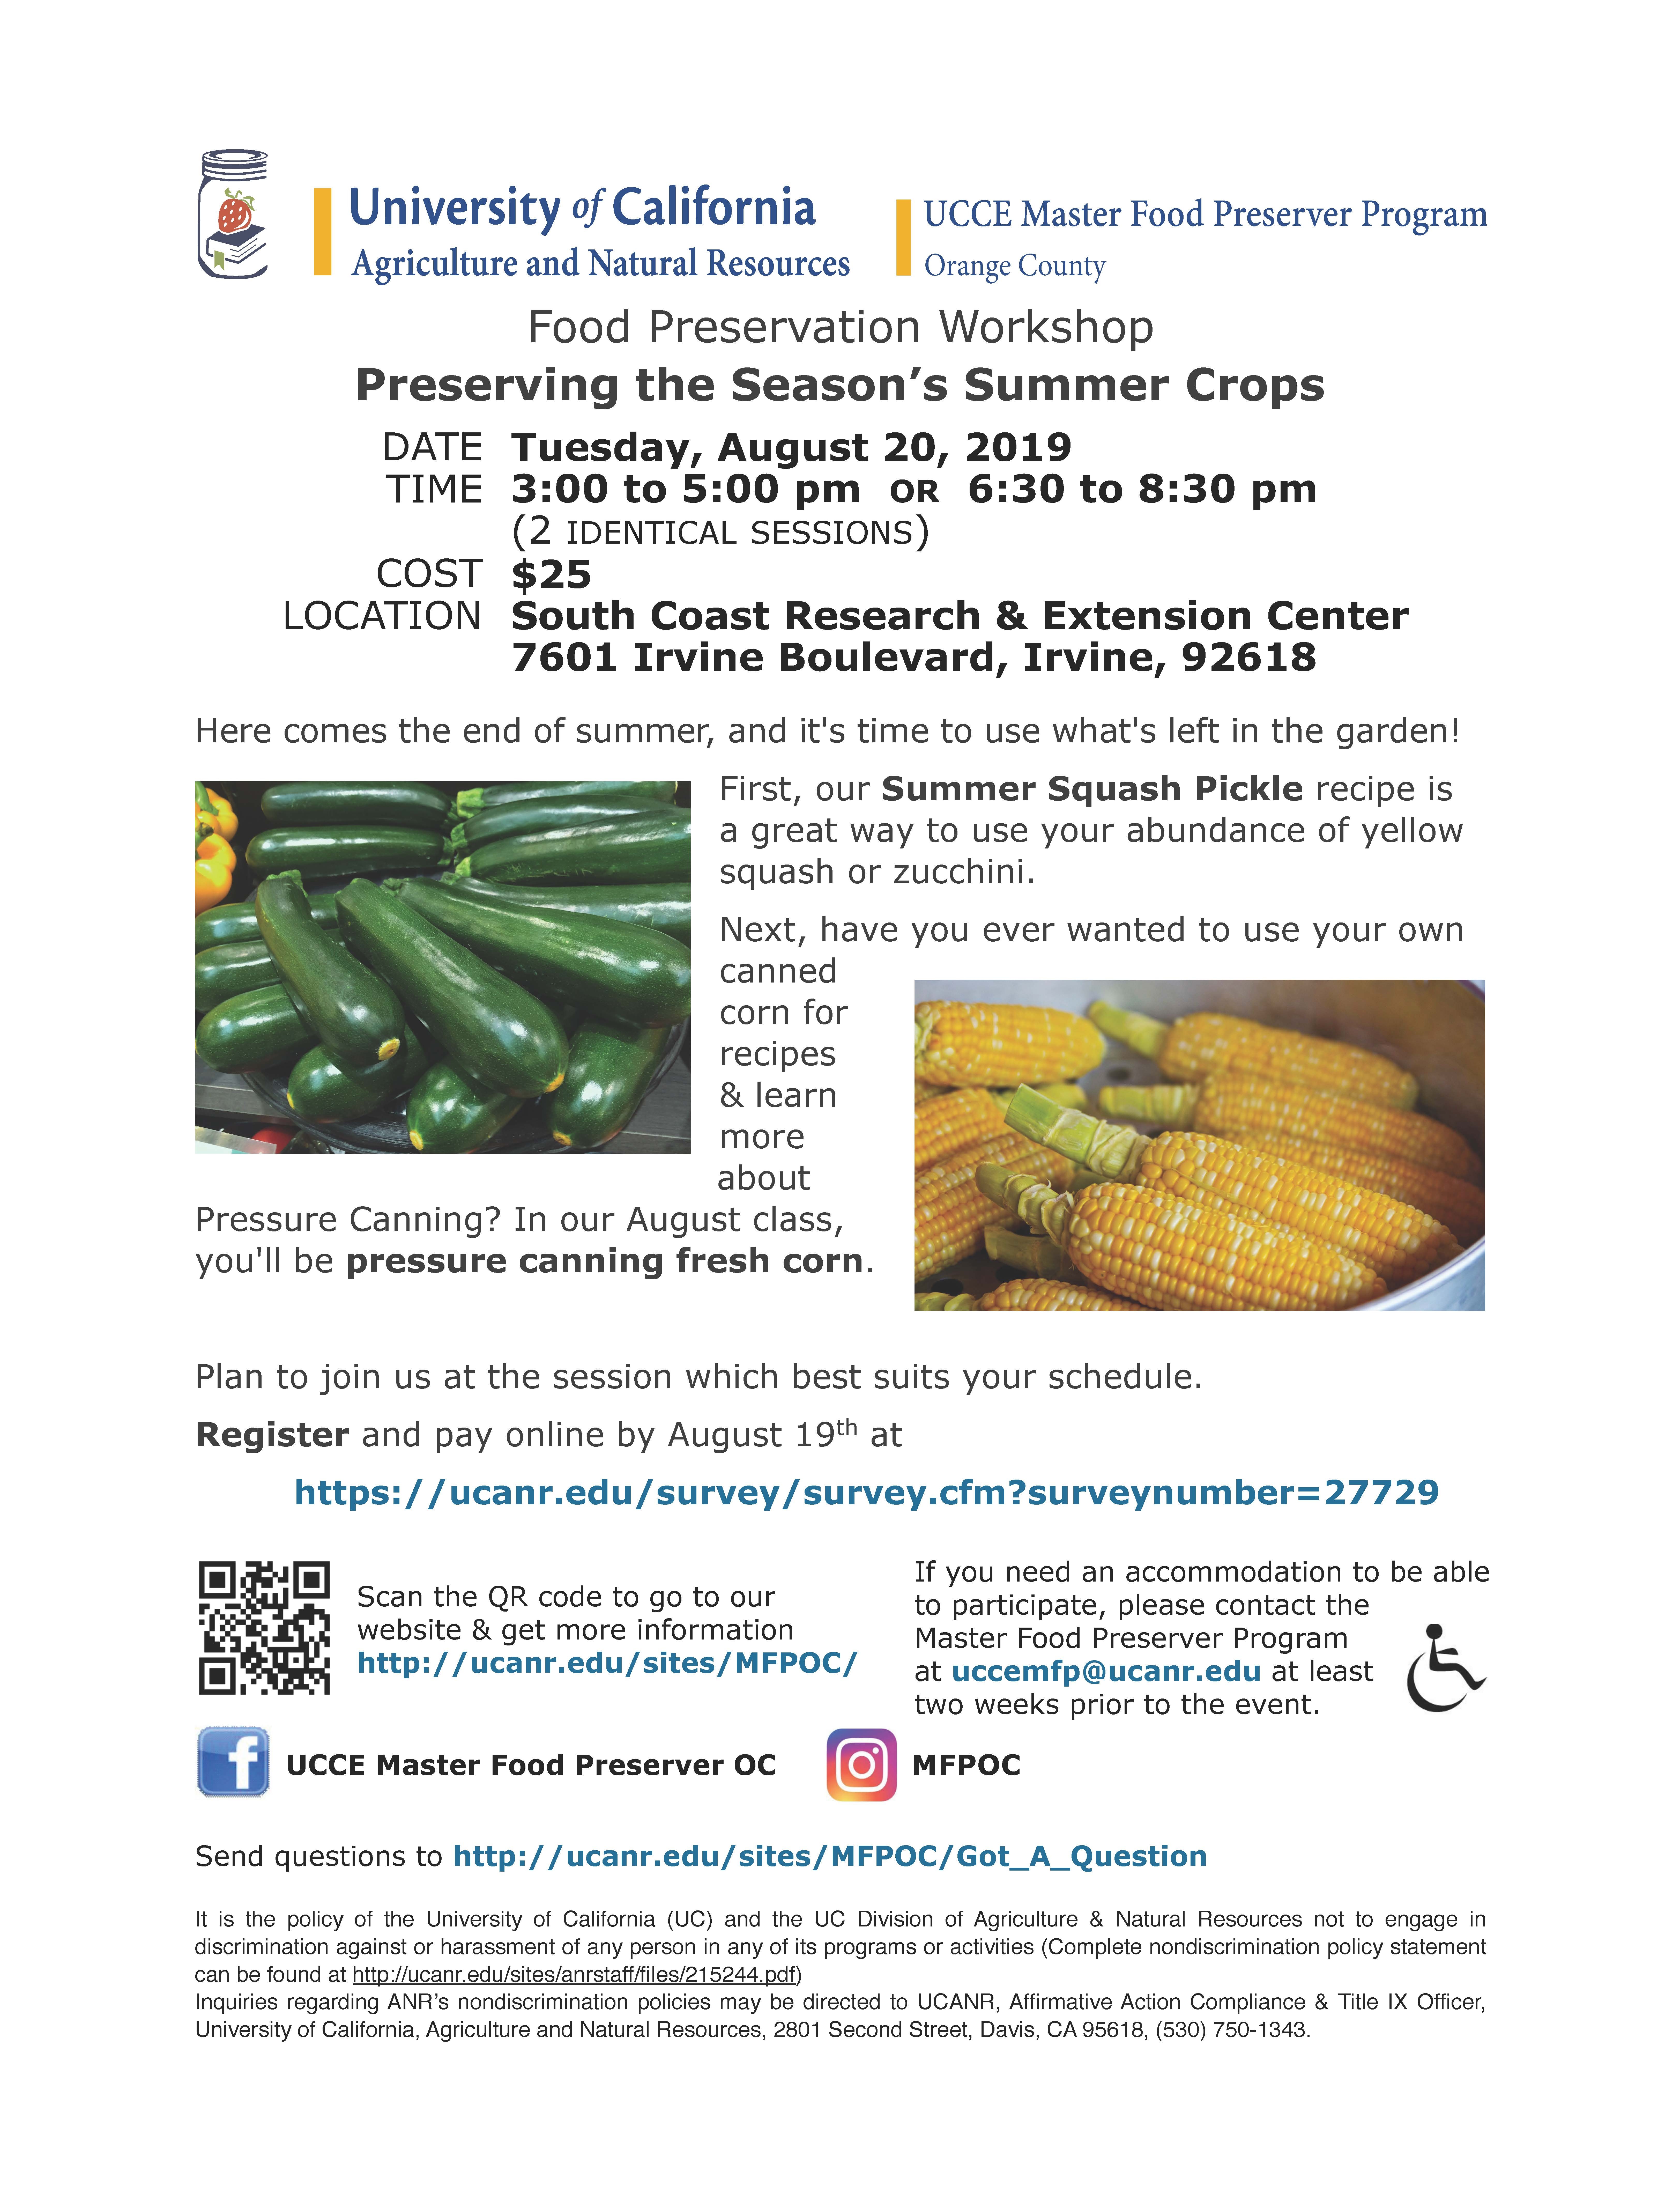 Field Days Workshops And Programs South Coast Research And